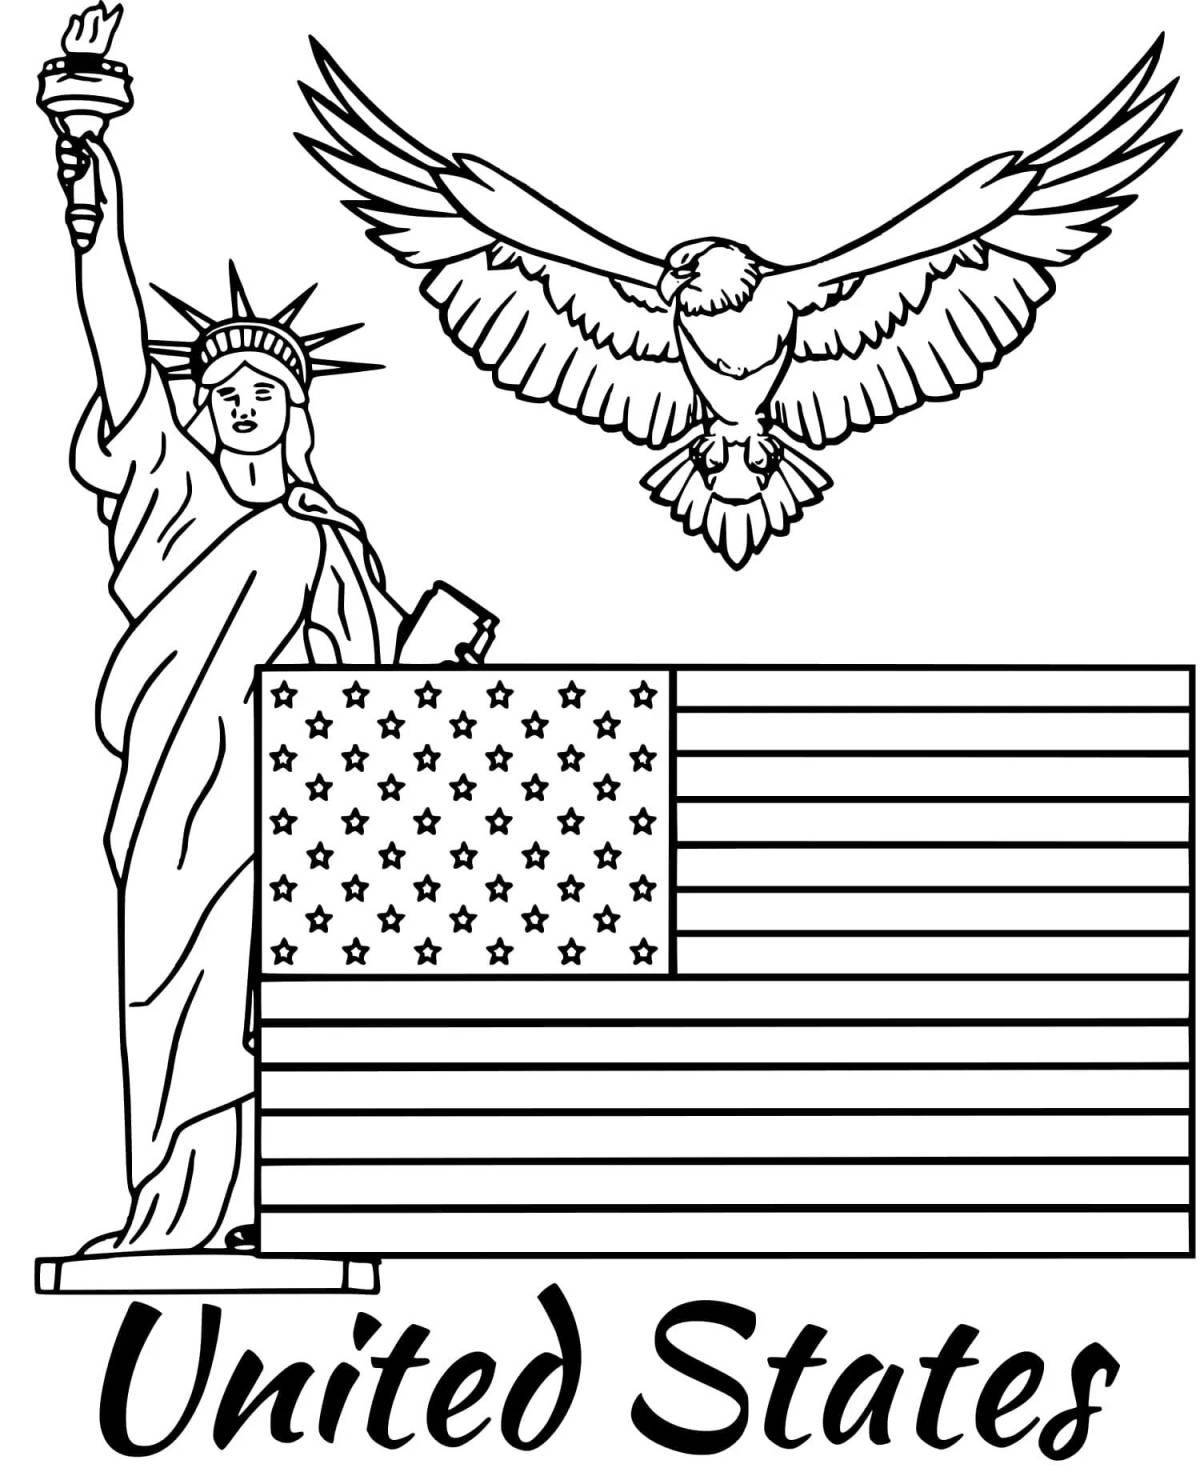 A richly colored American flag coloring page